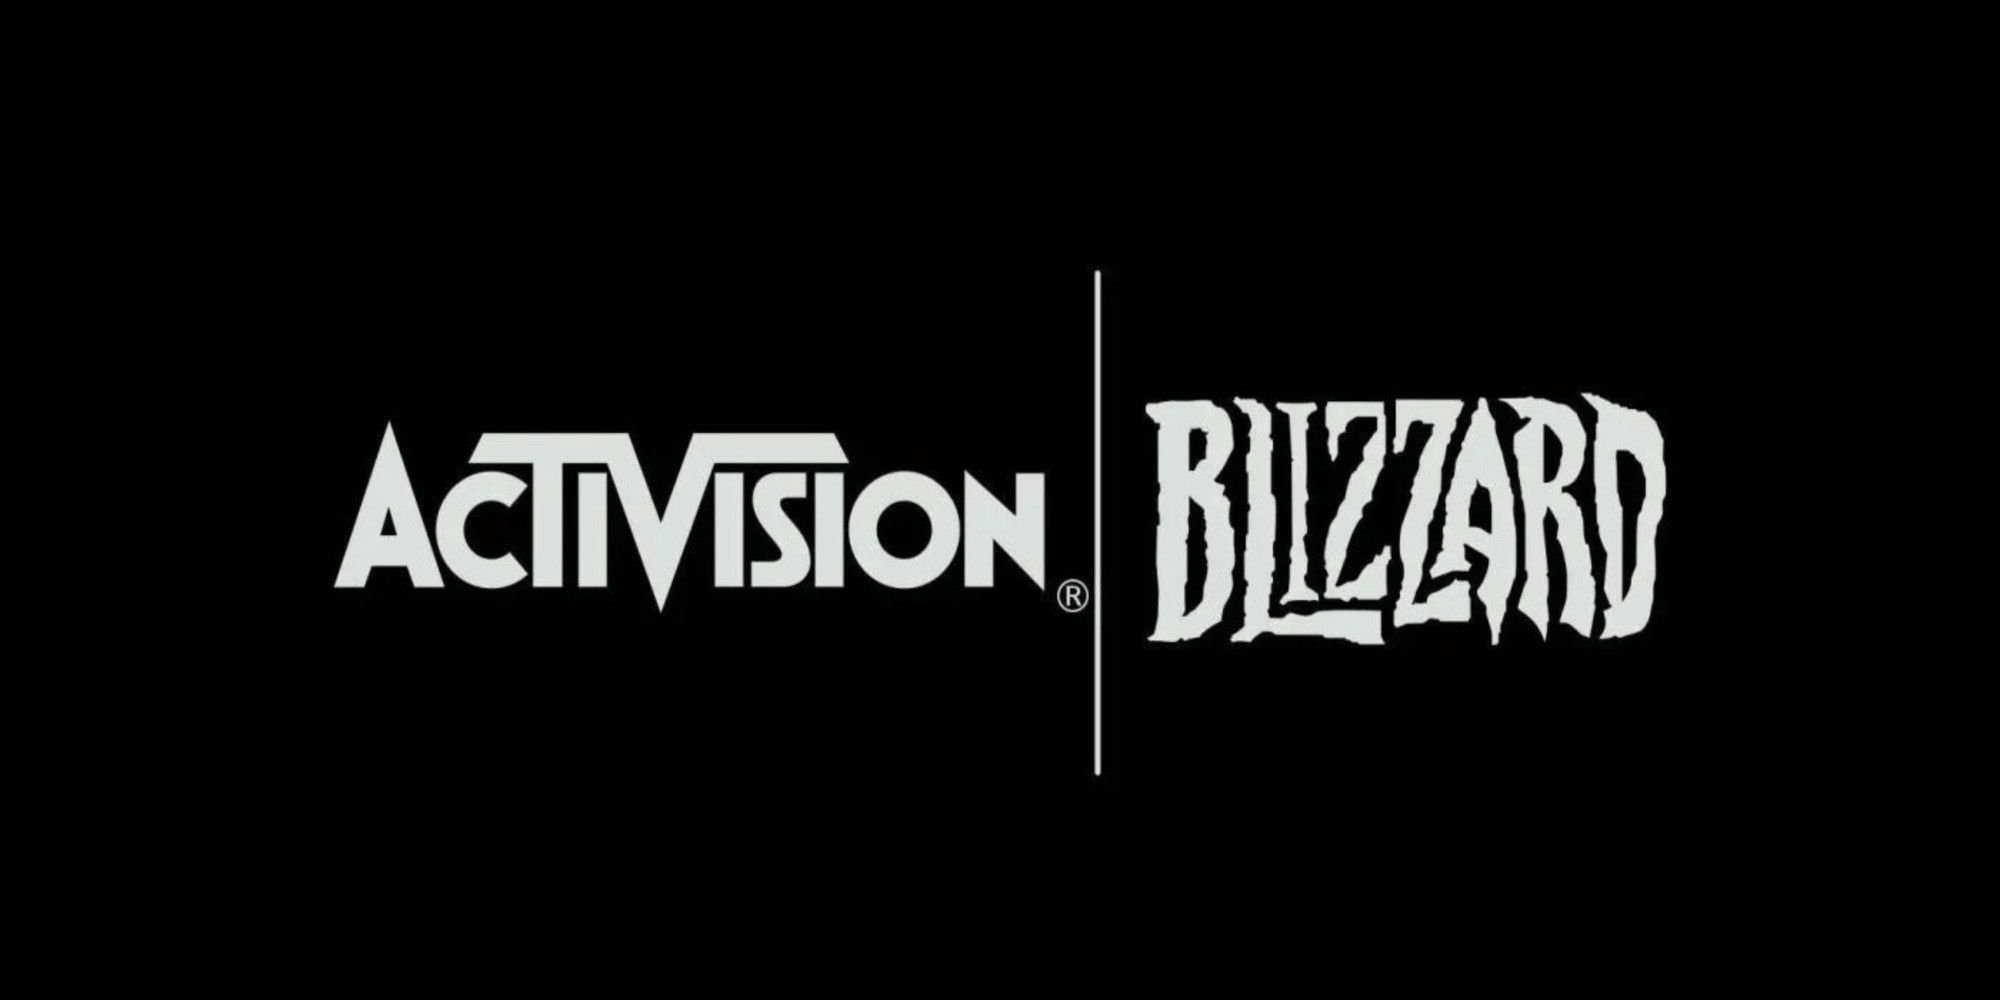 Blizzard President Calls Toxic Workplace Allegations "Extremely Troubling"